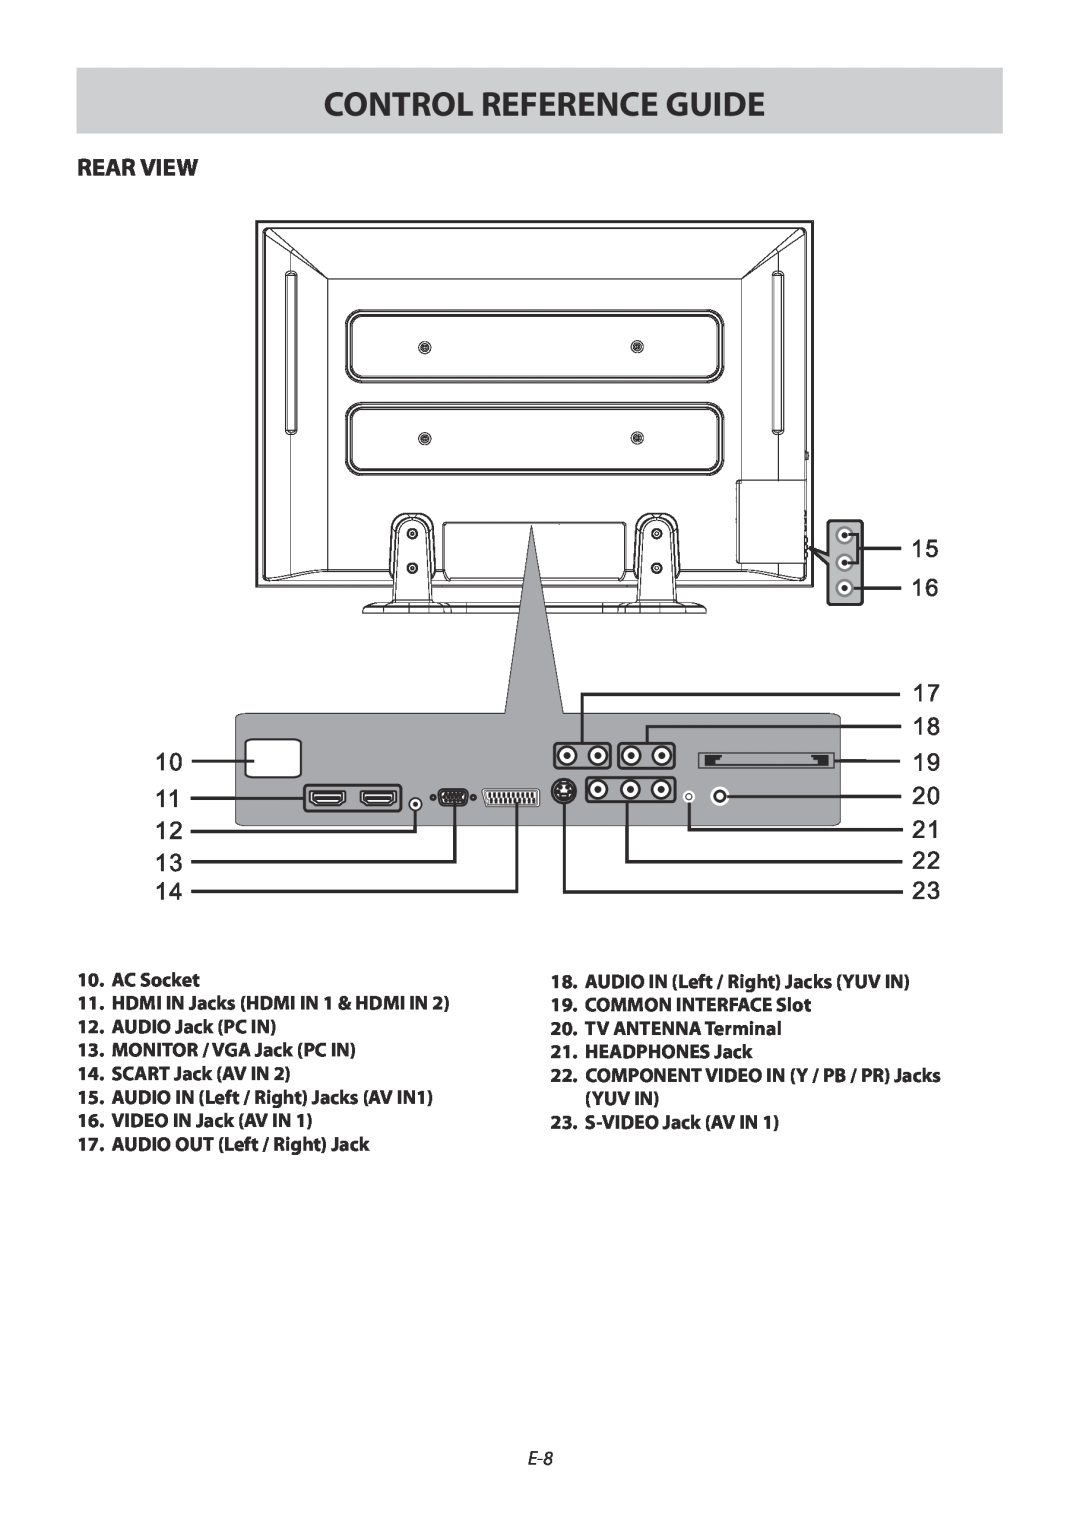 Technika 42-502 manual Rear View, Control Reference Guide 